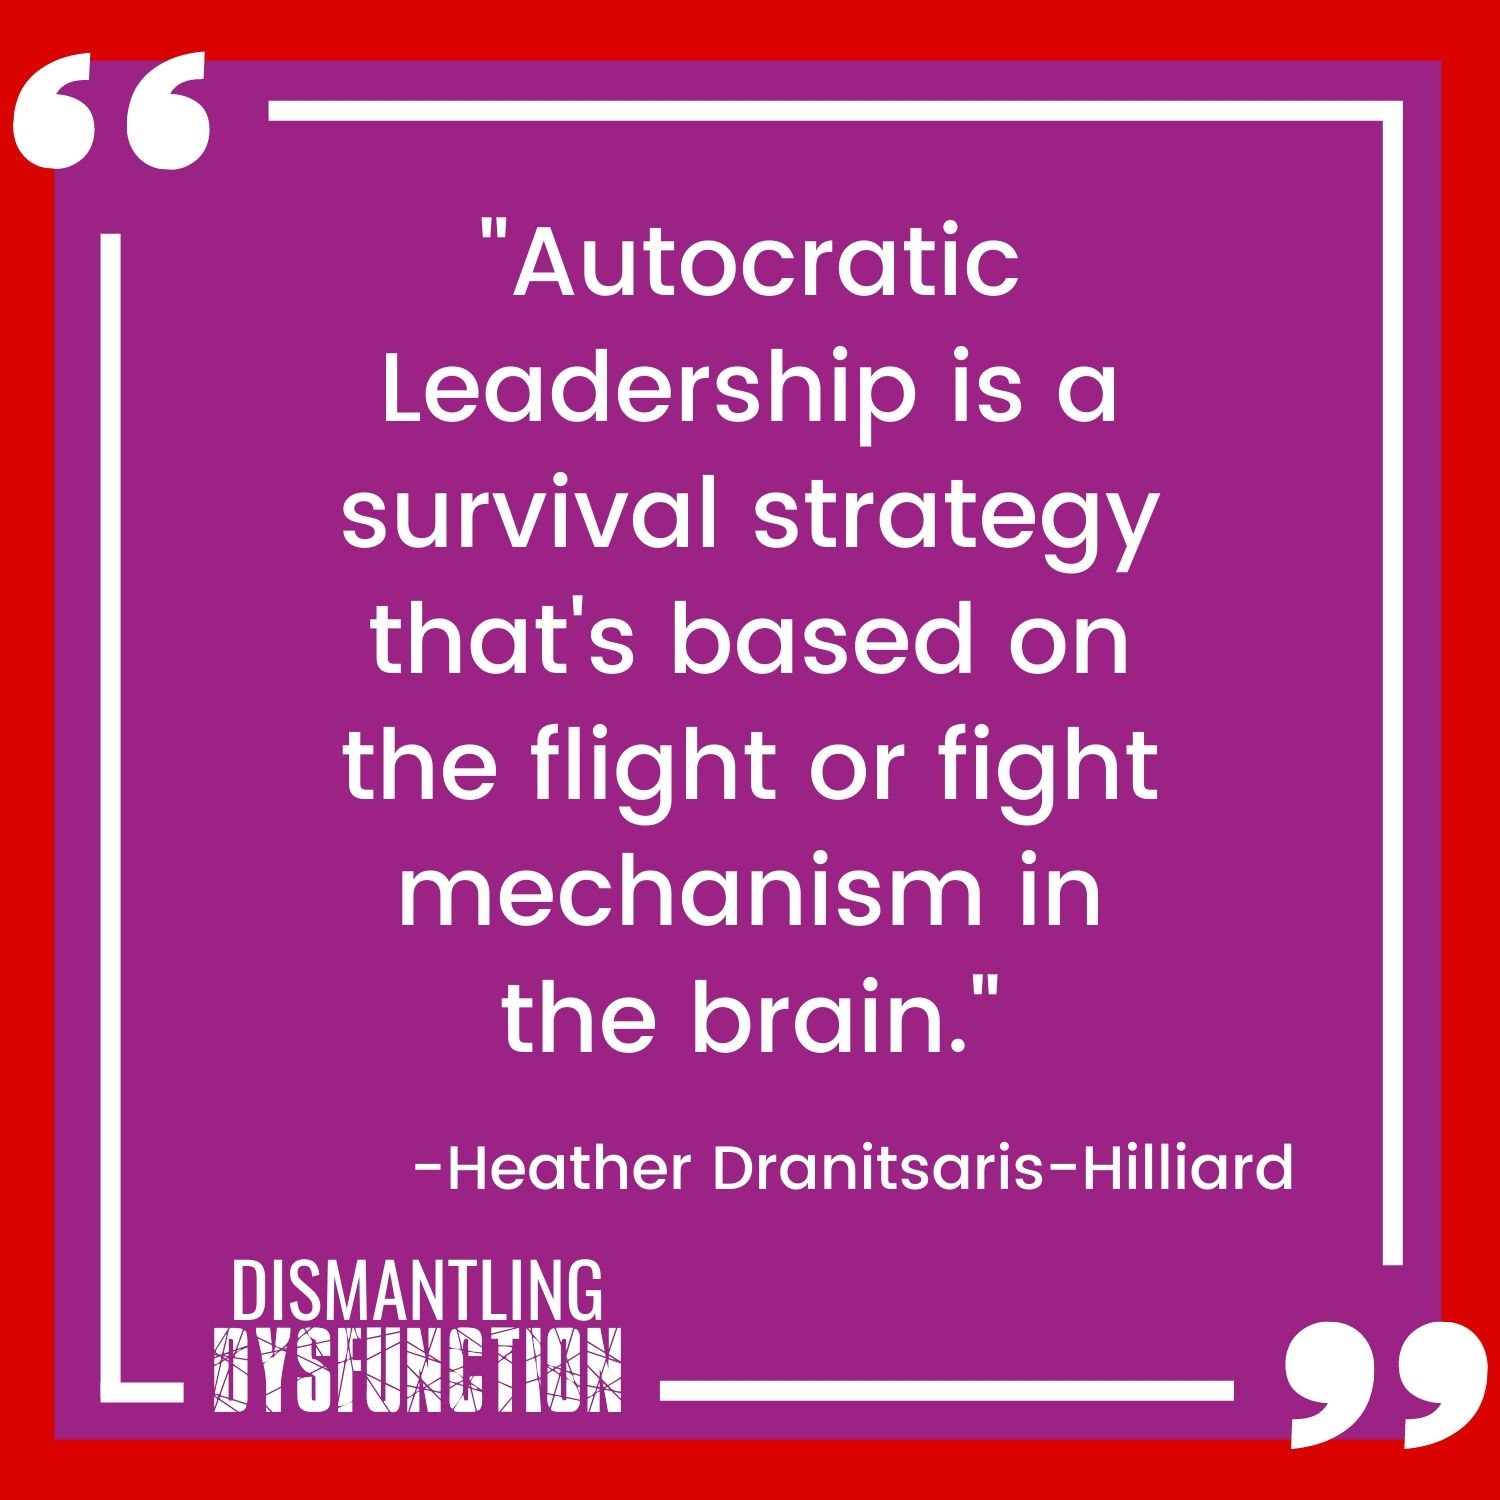 Autocratic Leadership is a survival strategy that is based on the flight or fight mechanism in the brain quote